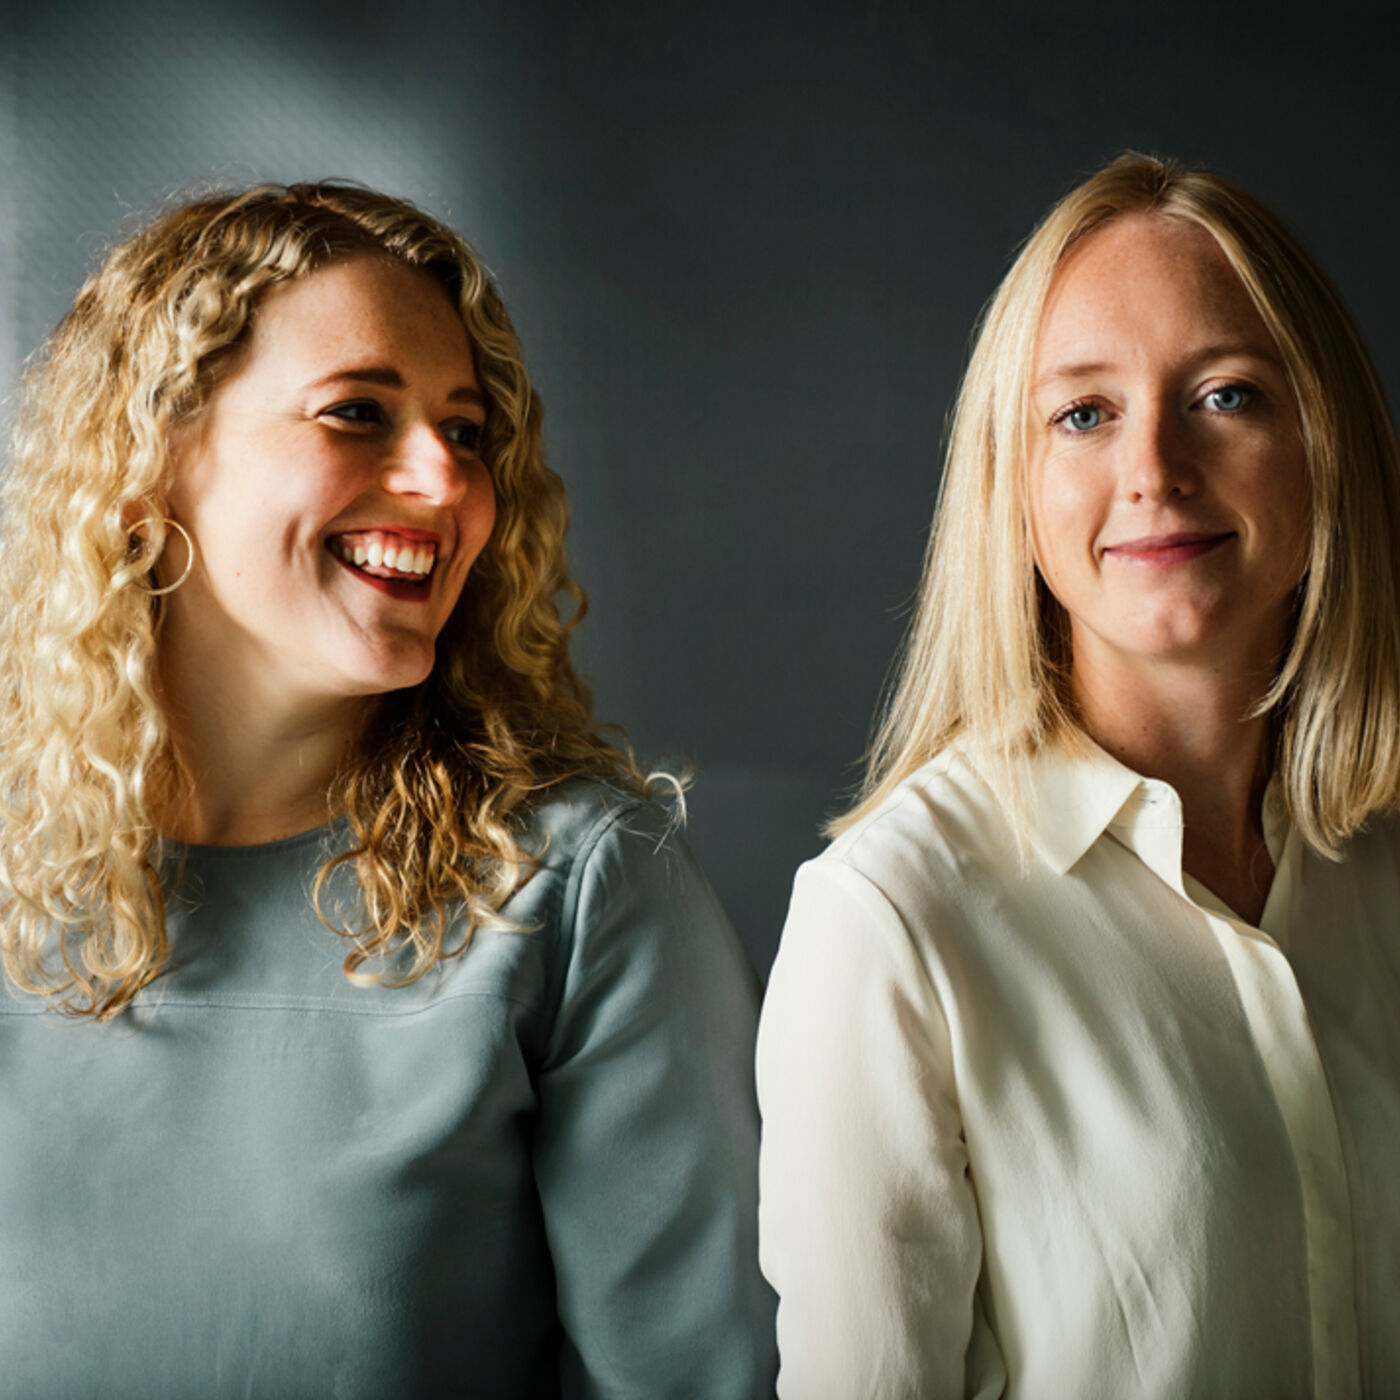 Meaghan Barry & Lilian Crum - Partners & Creative Directors at Unsold Studio